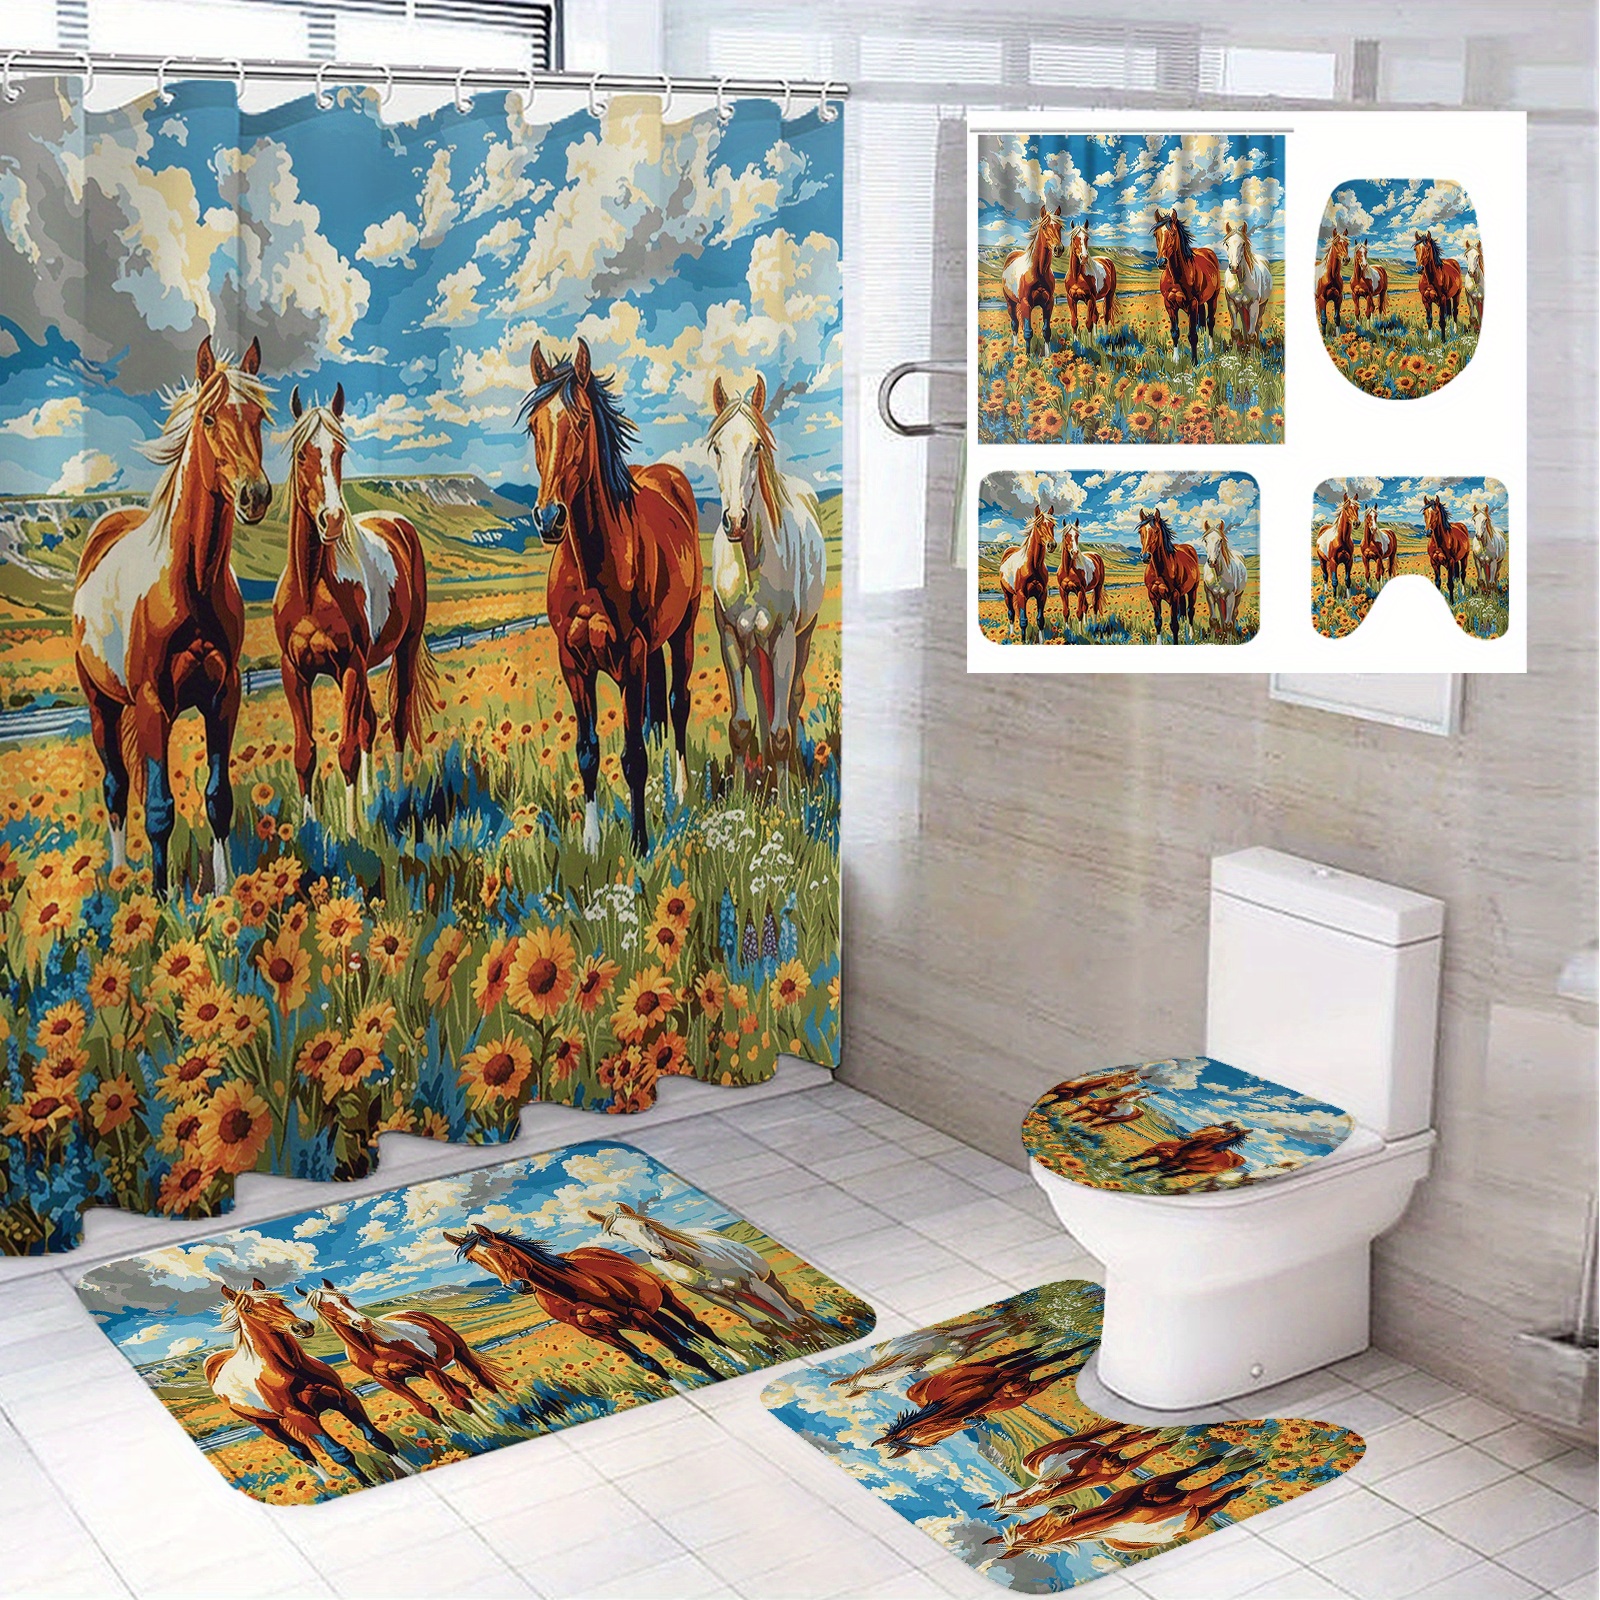 

Vibrant Horse And Sunflower Bathroom Set: Includes 71"x71" Shower Curtain, 45"x17.7" Toilet Seat Cover, 75"x29.5" Bath Mat, And 37"x14.6" U-shaped Bath Mat - Perfect For Modern Decoration